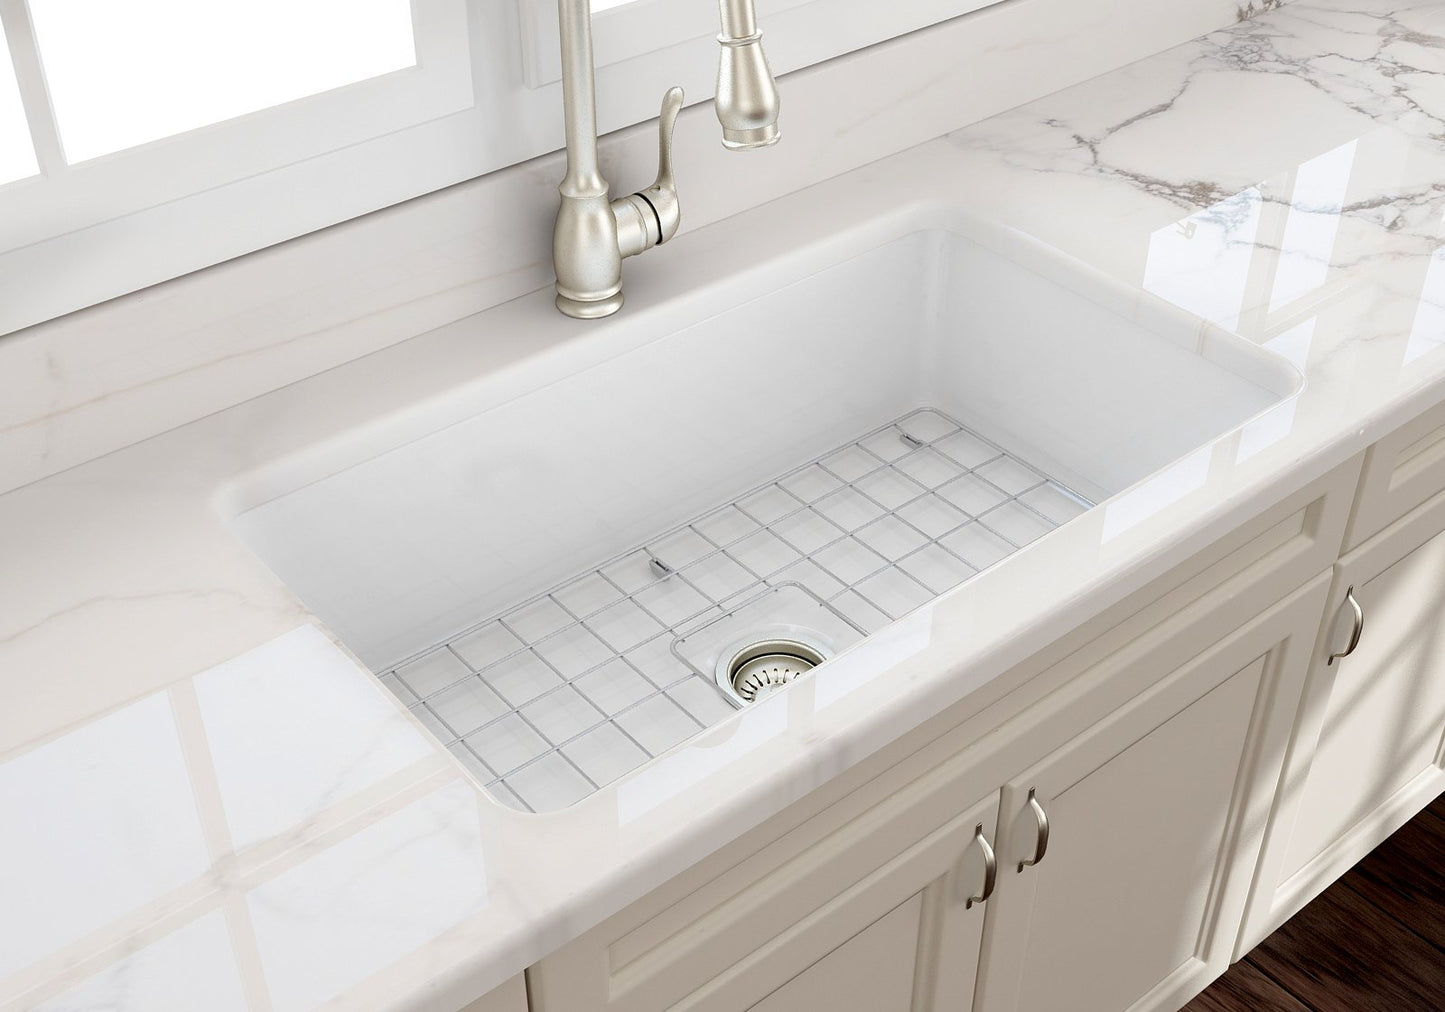 Bocchi Undermount Fireclay 32" Single Bowl Kitchen Sink (Call for special pricing)